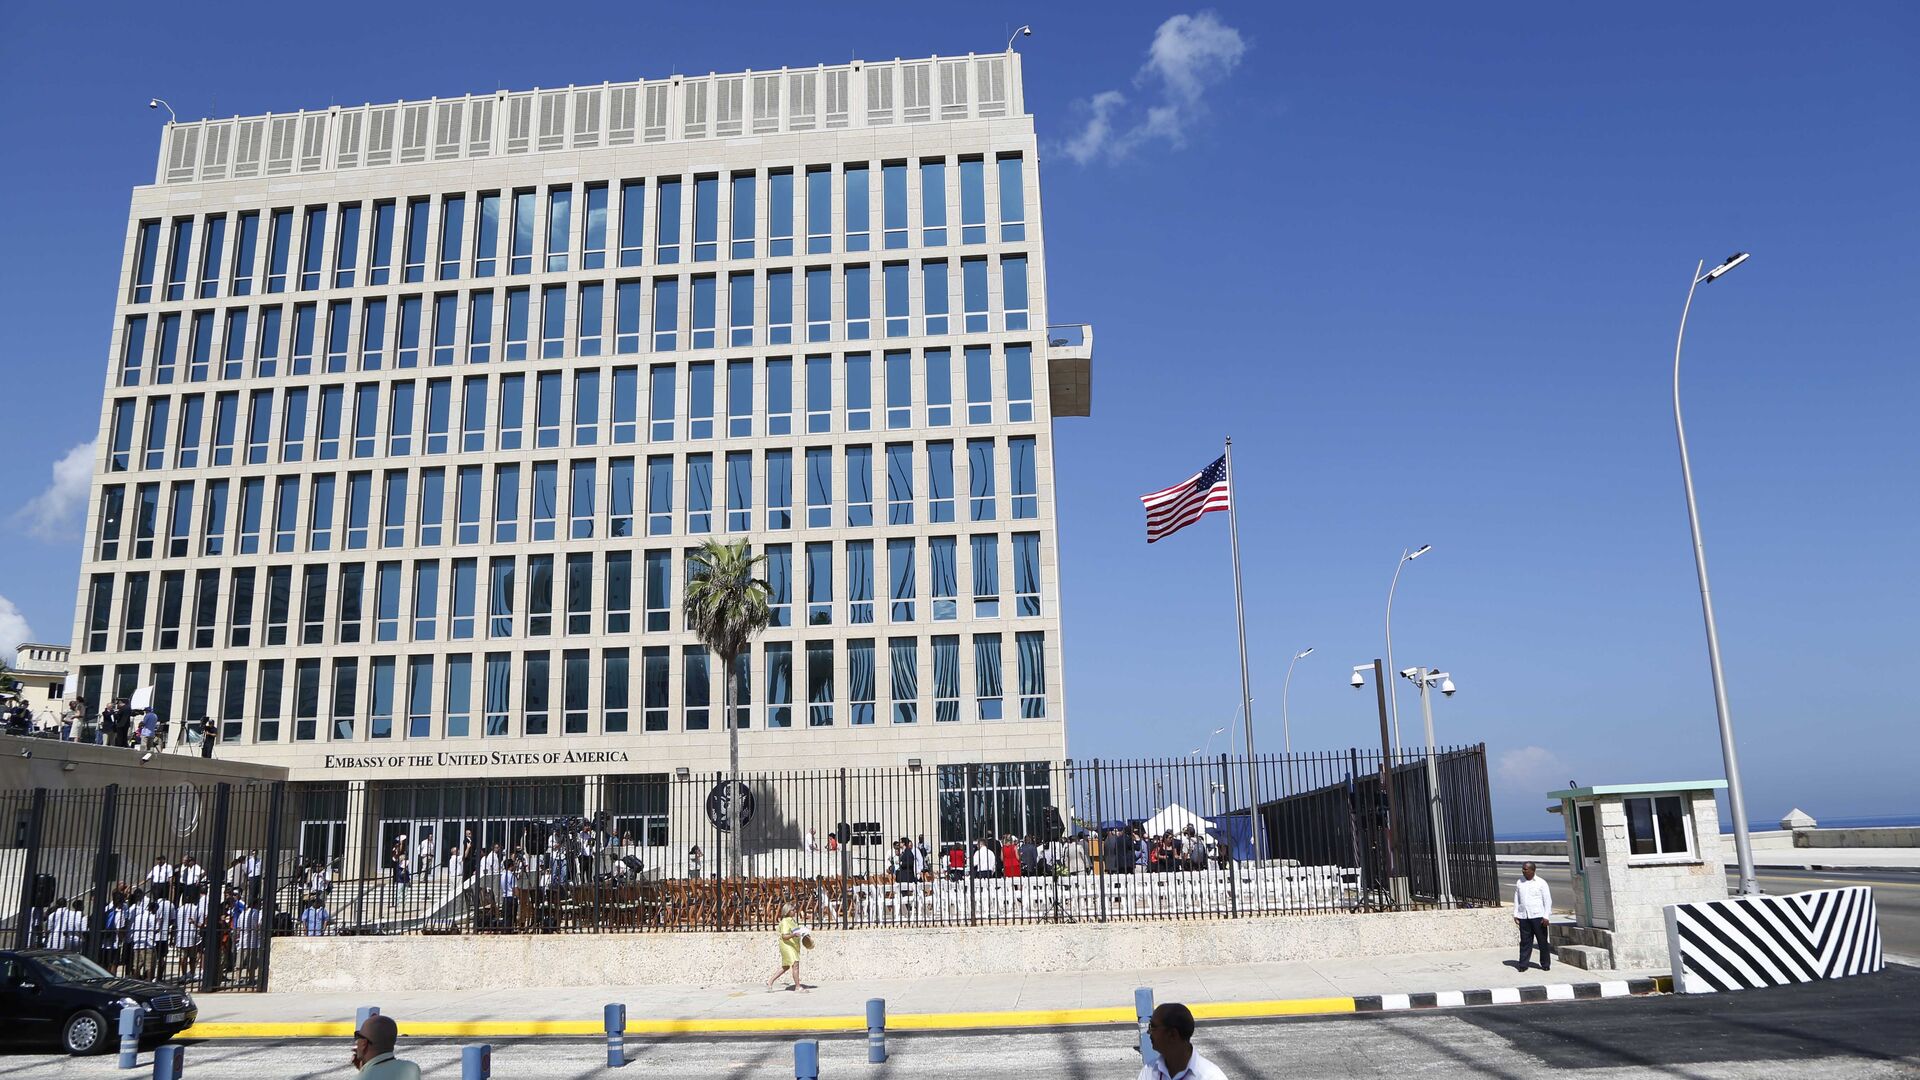 The United States flag flies at the newly-opened embassy in Havana, Cuba. (File) - Sputnik International, 1920, 03.02.2022